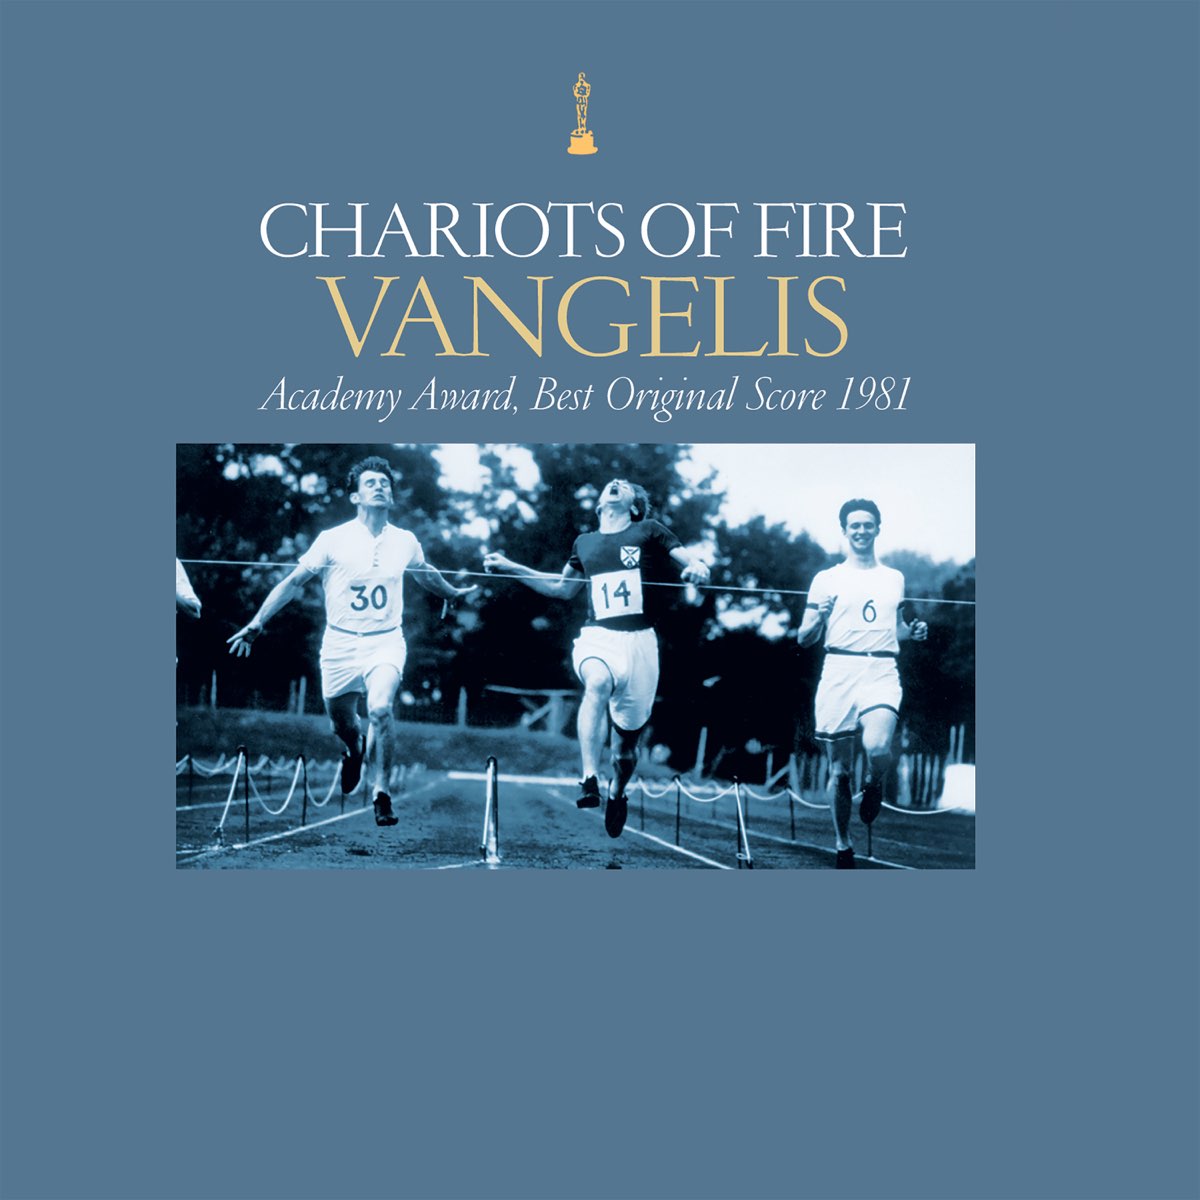 chariots of fire song torrent